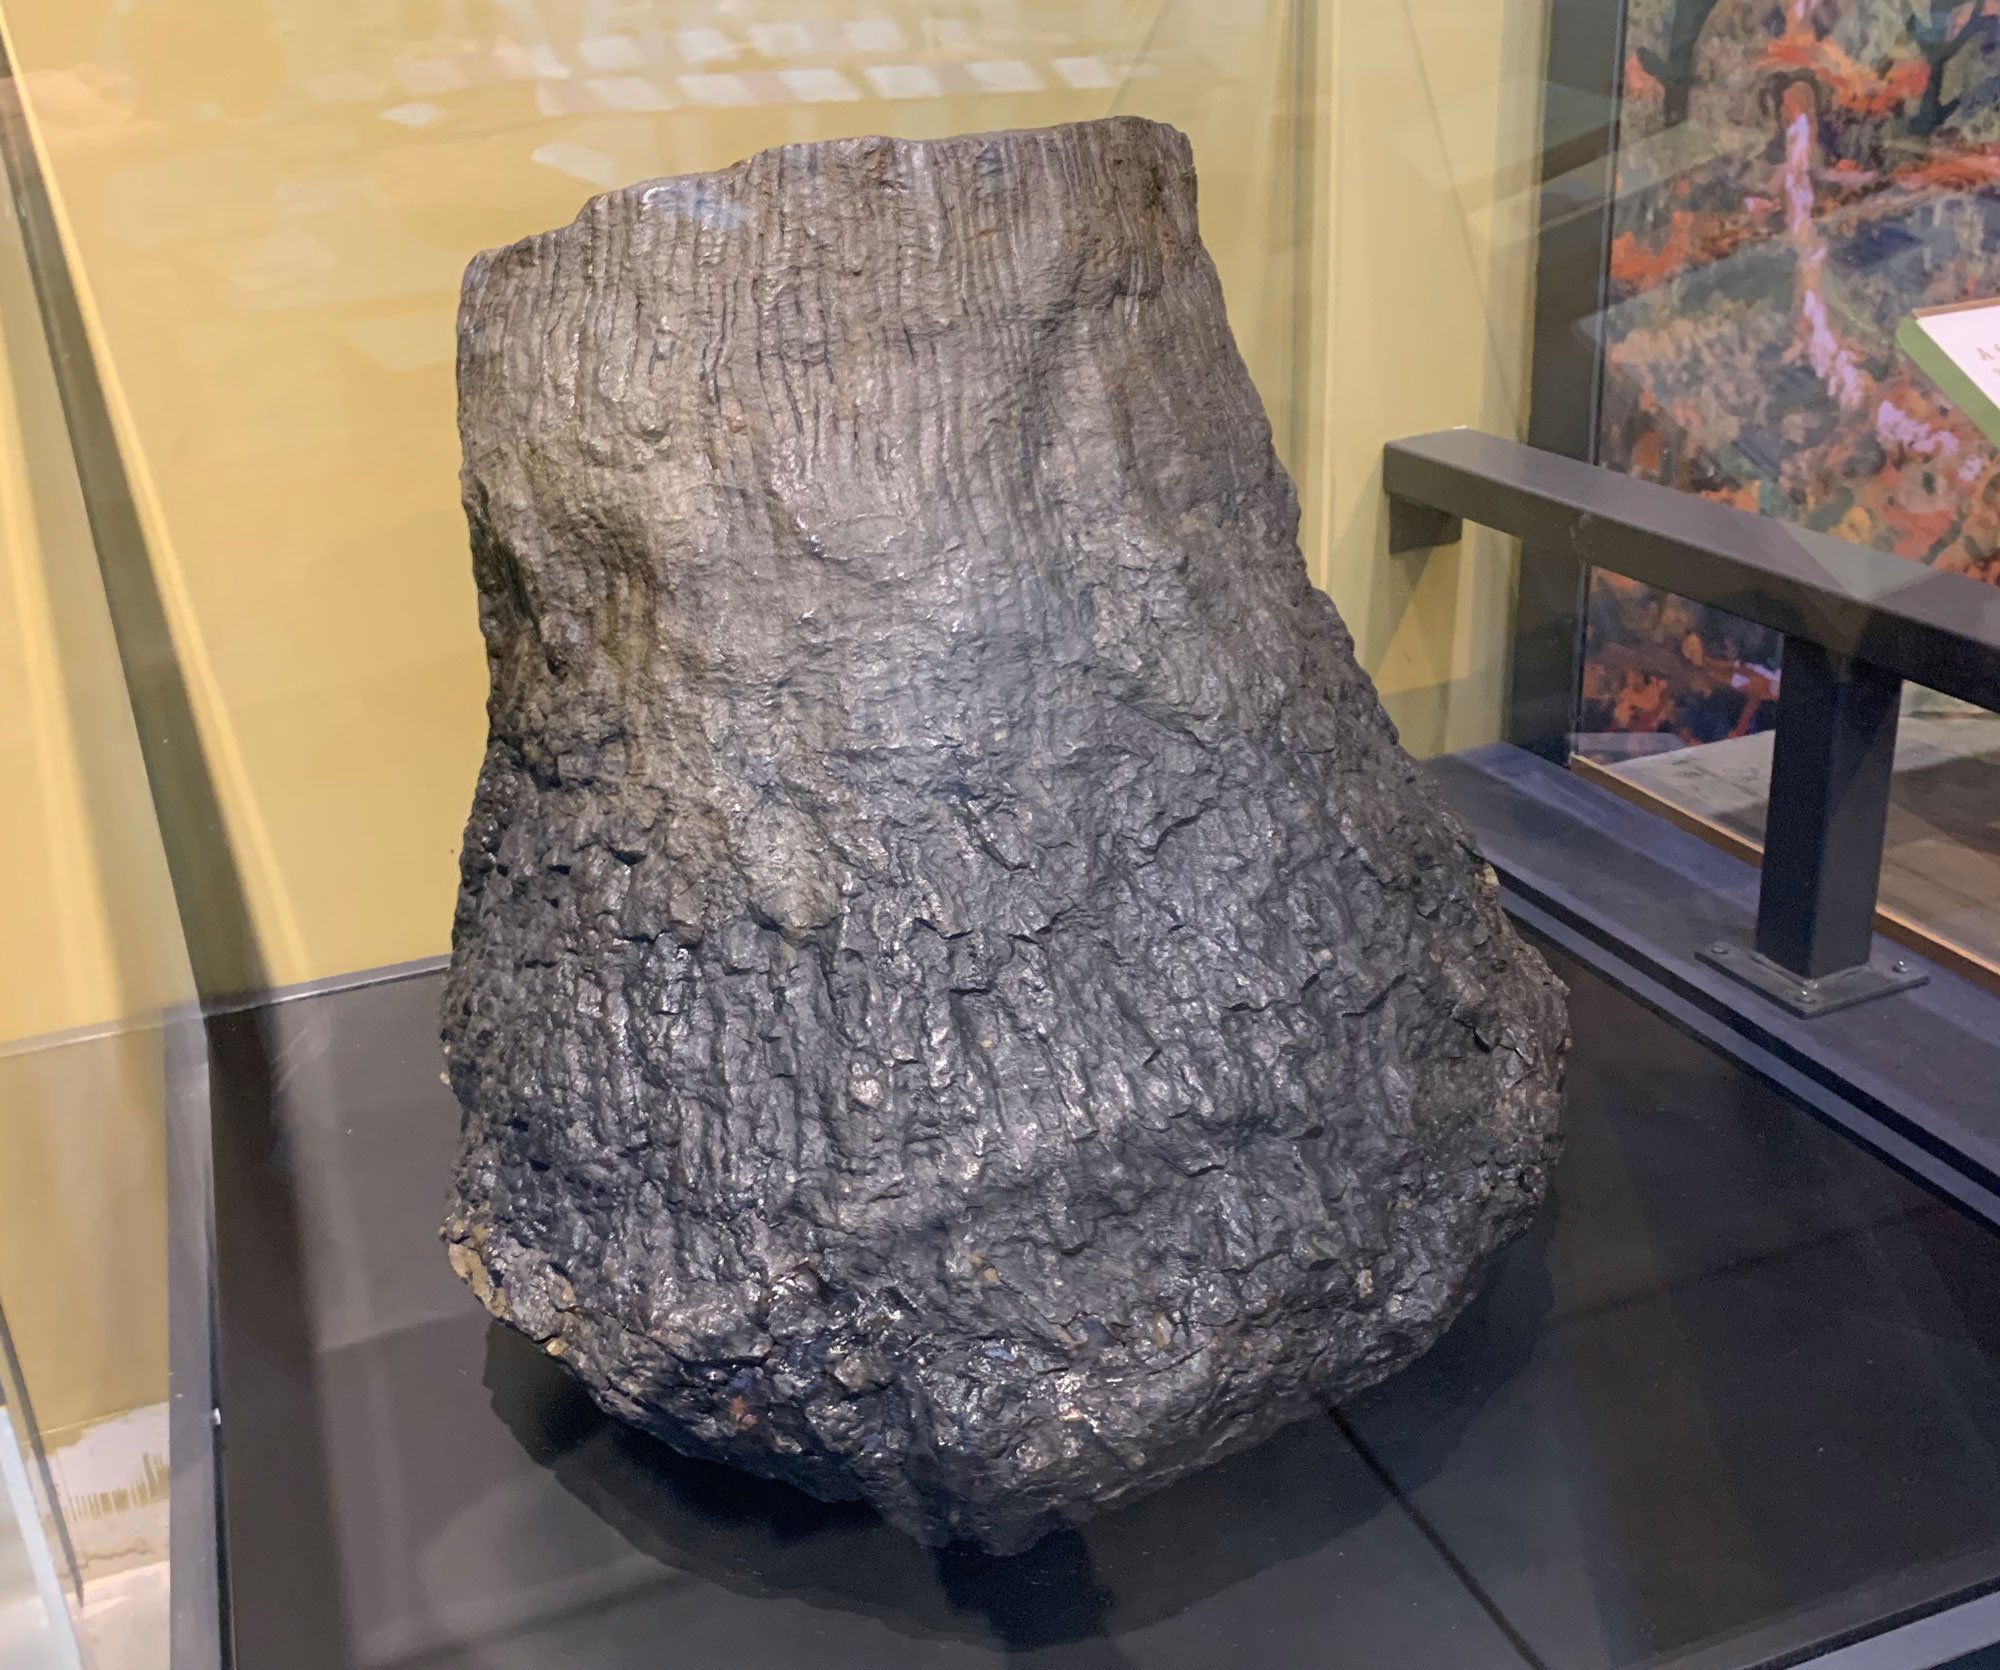 Photograph of a fossil tree stump from Gilboa, New York.